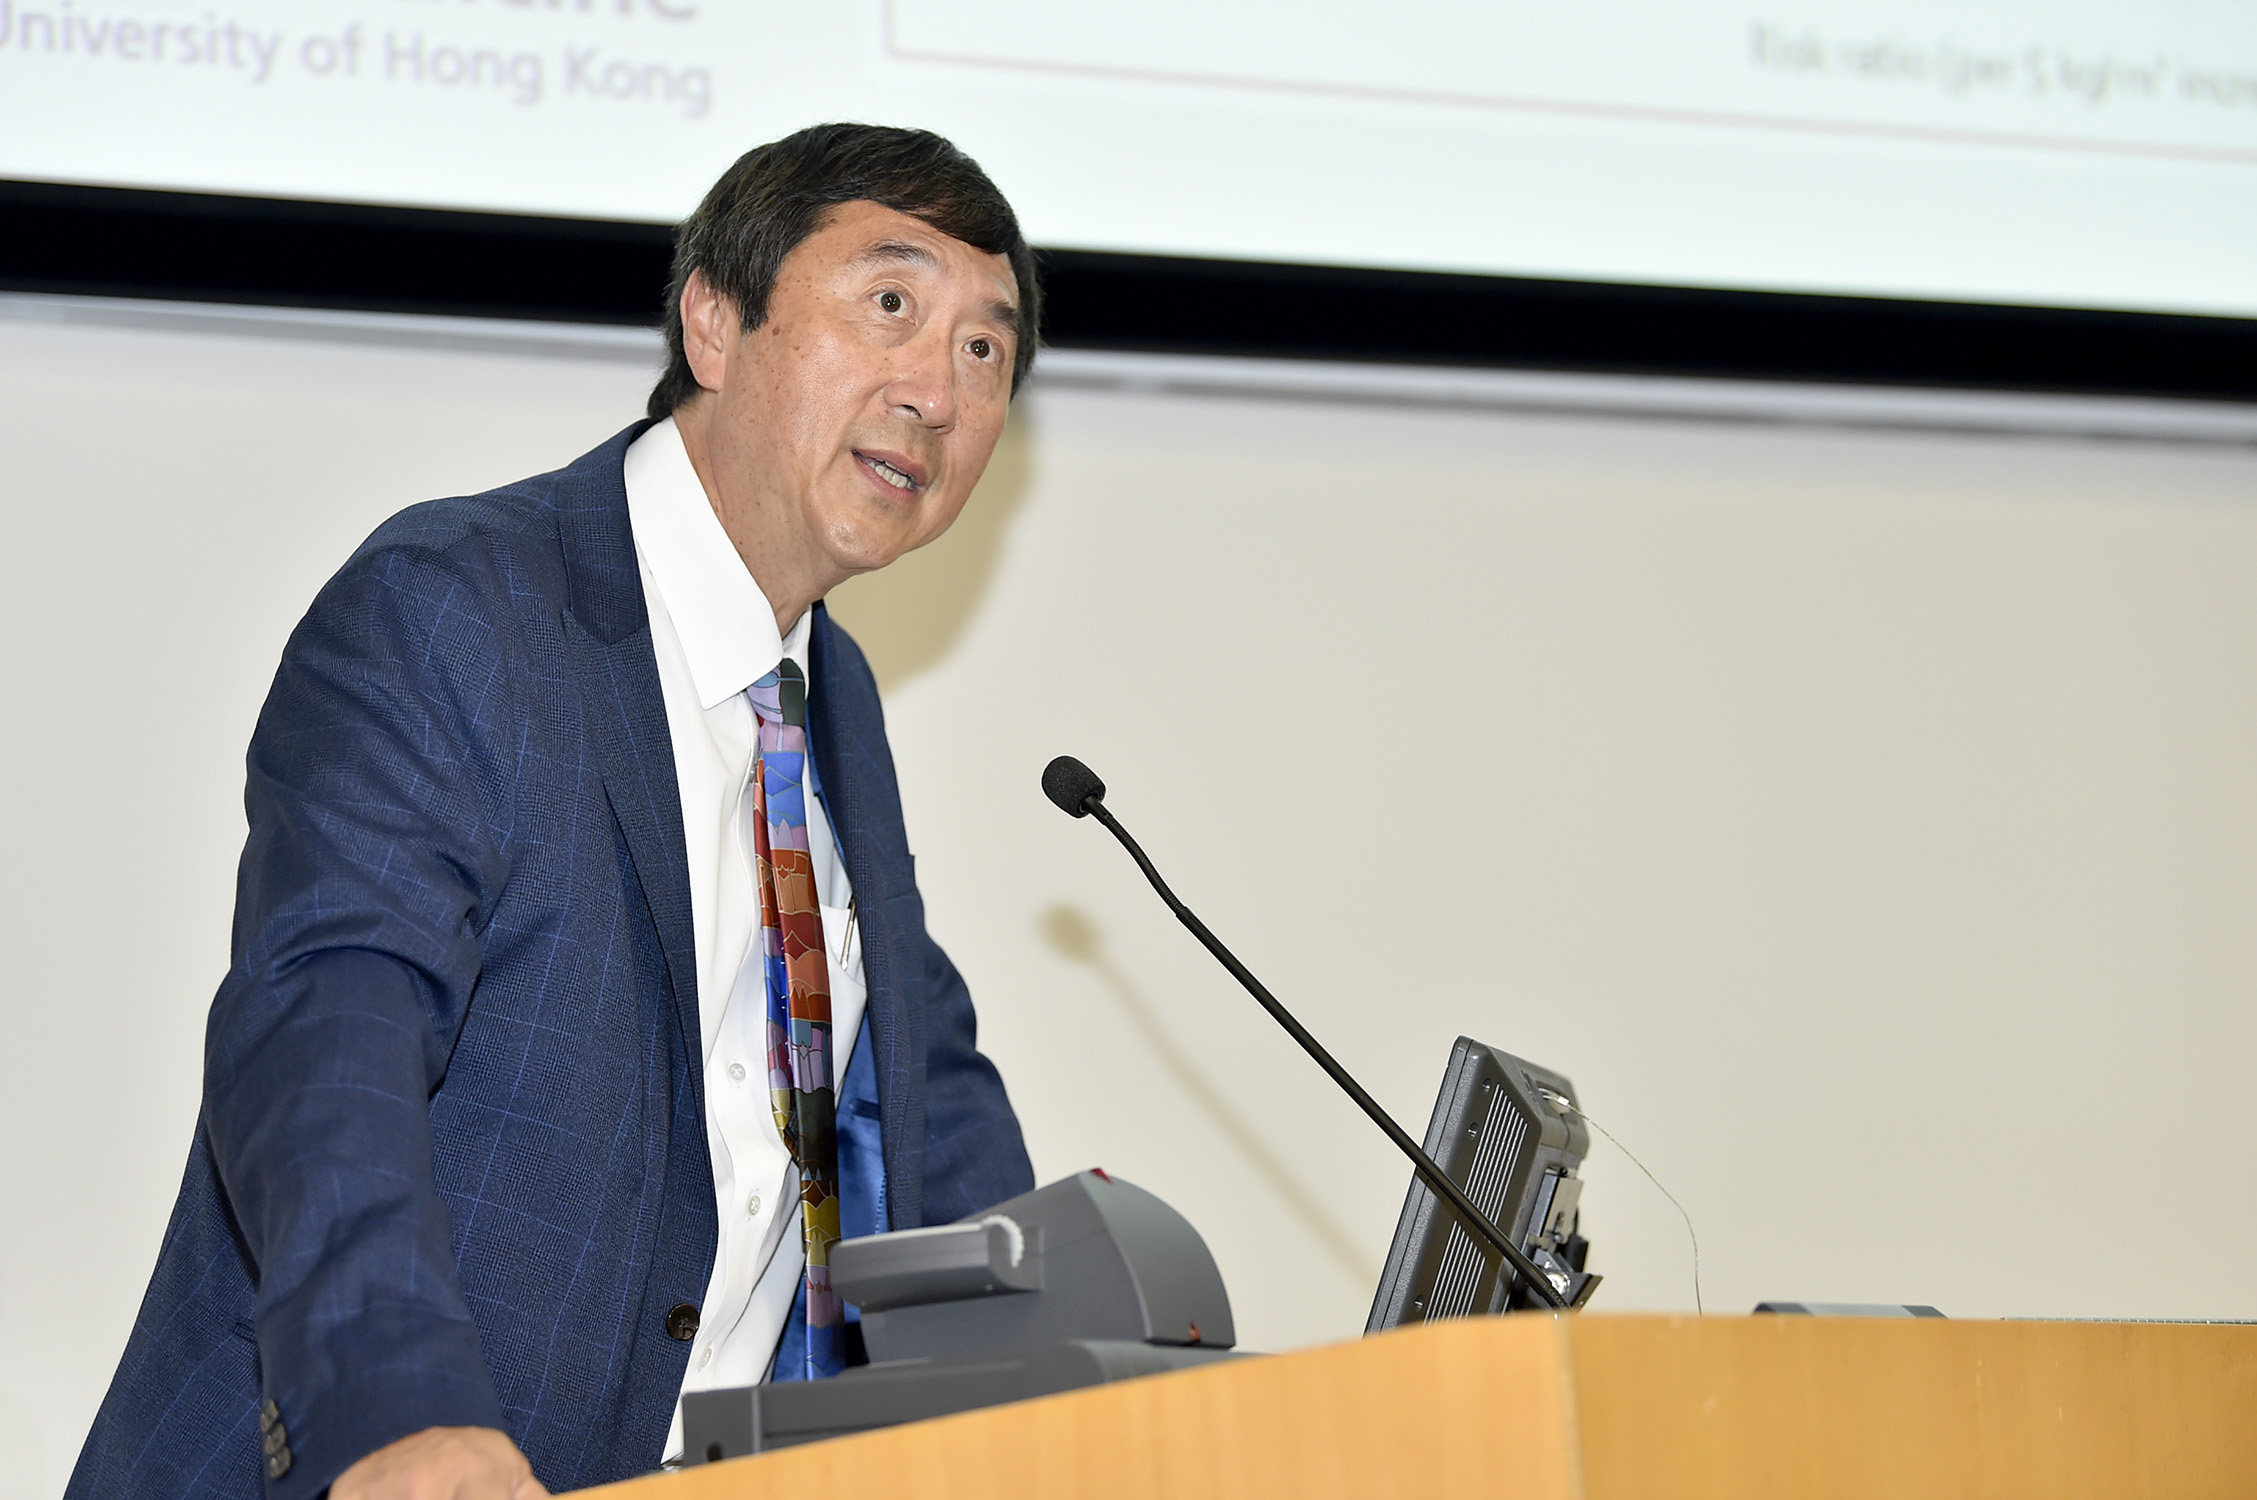 Professor Joseph SUNG highlights that they wish to raise public awareness of the relationship between obesity and cancer, and provide public health education. The research team also wishes to collect medical data to assist the government in formulating cancer prevention policy.